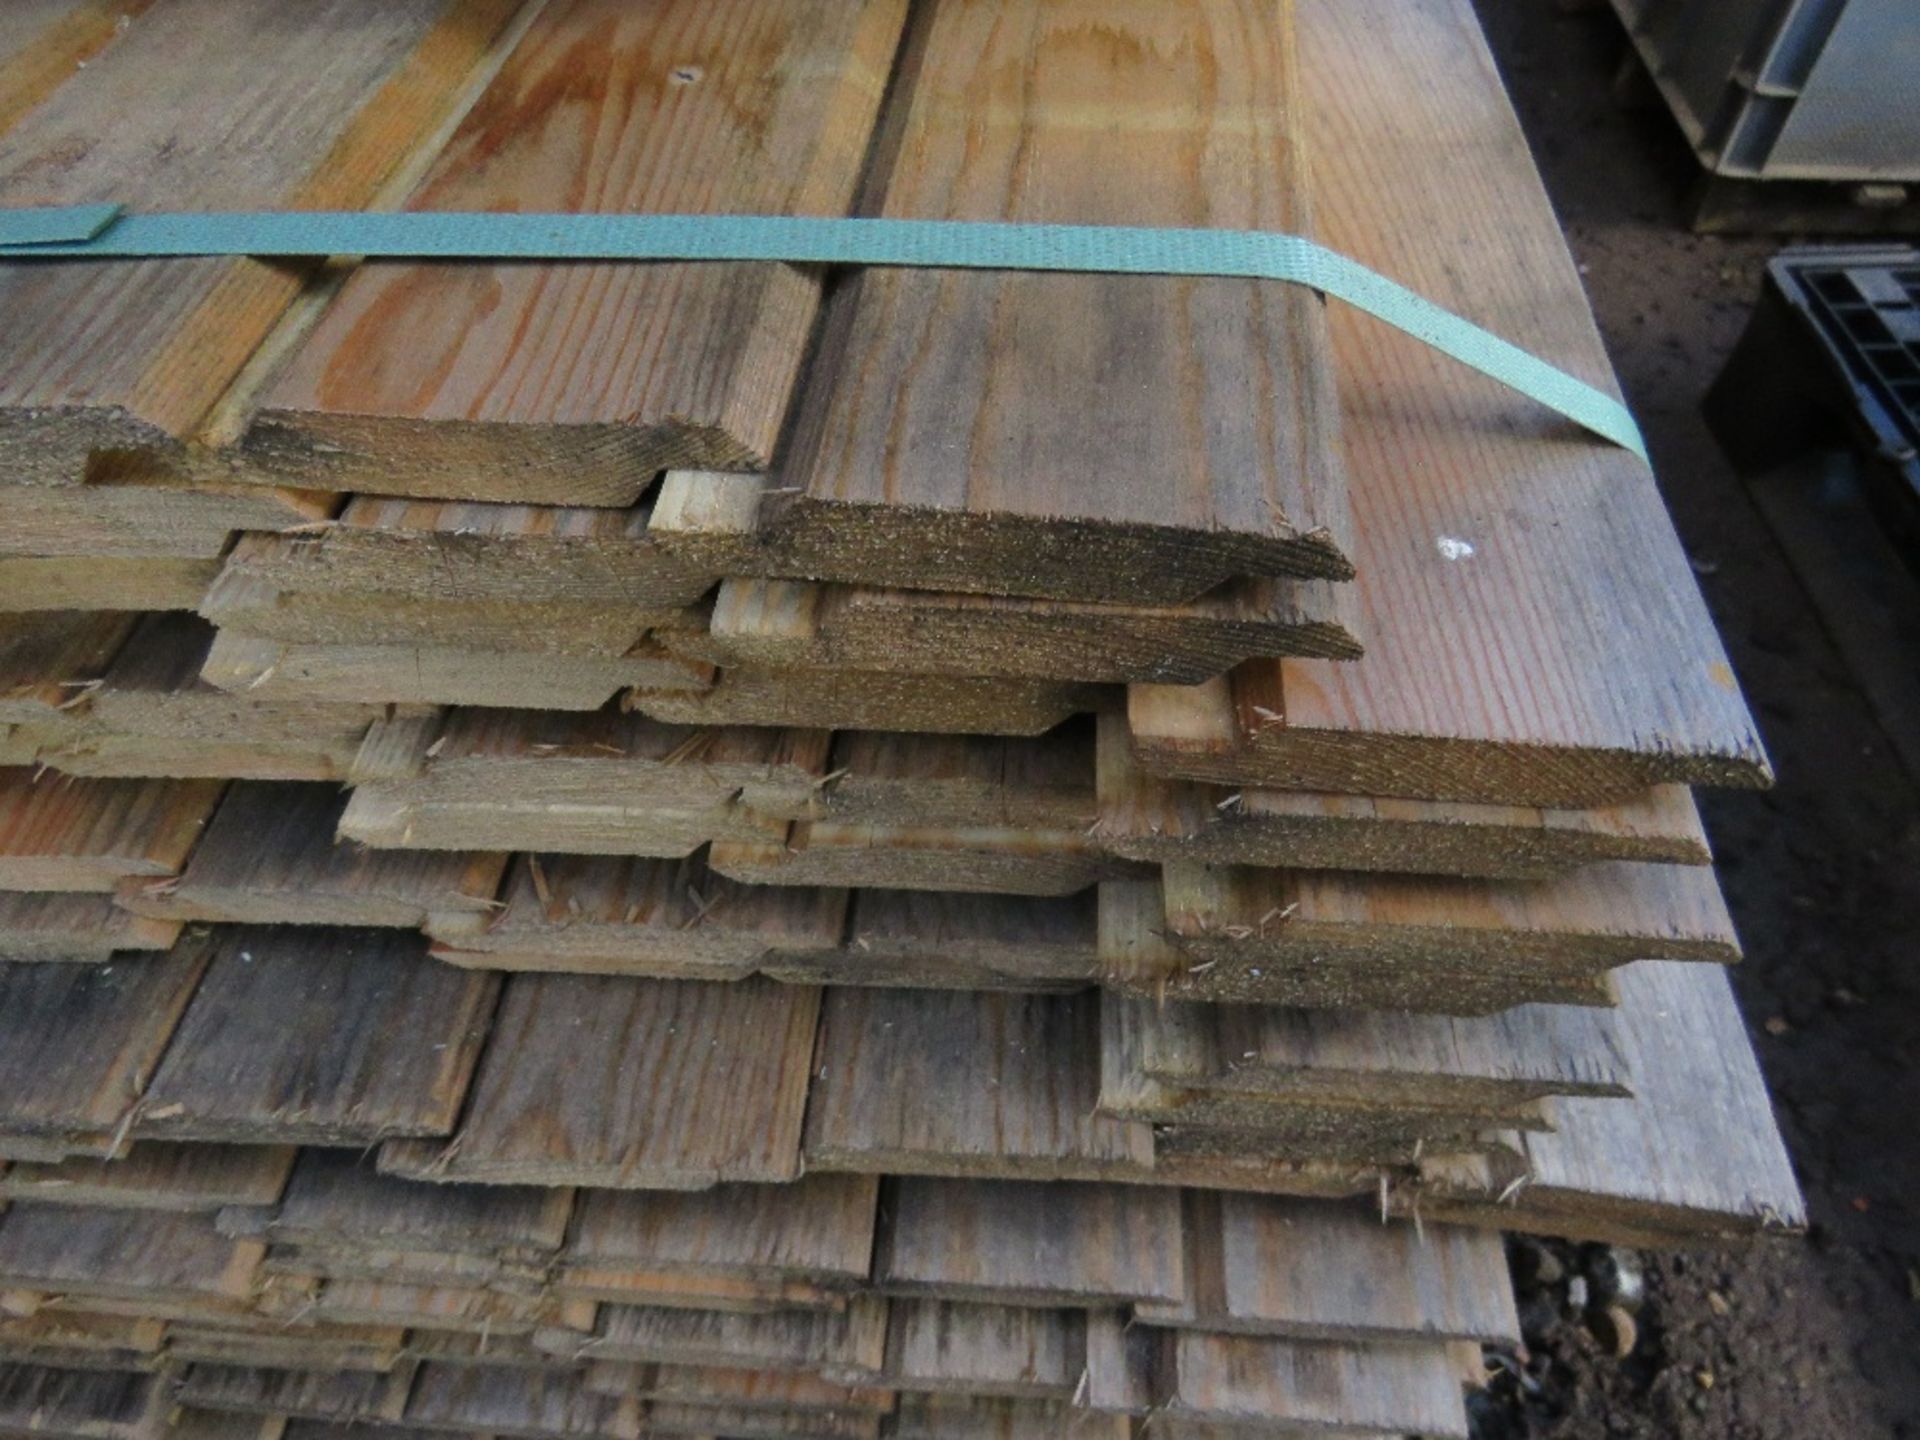 PACK OF UNTREATED SHIPLAP CLADDING TIMBER 1.83M X 10CM WIDTH APPROX. - Image 3 of 3